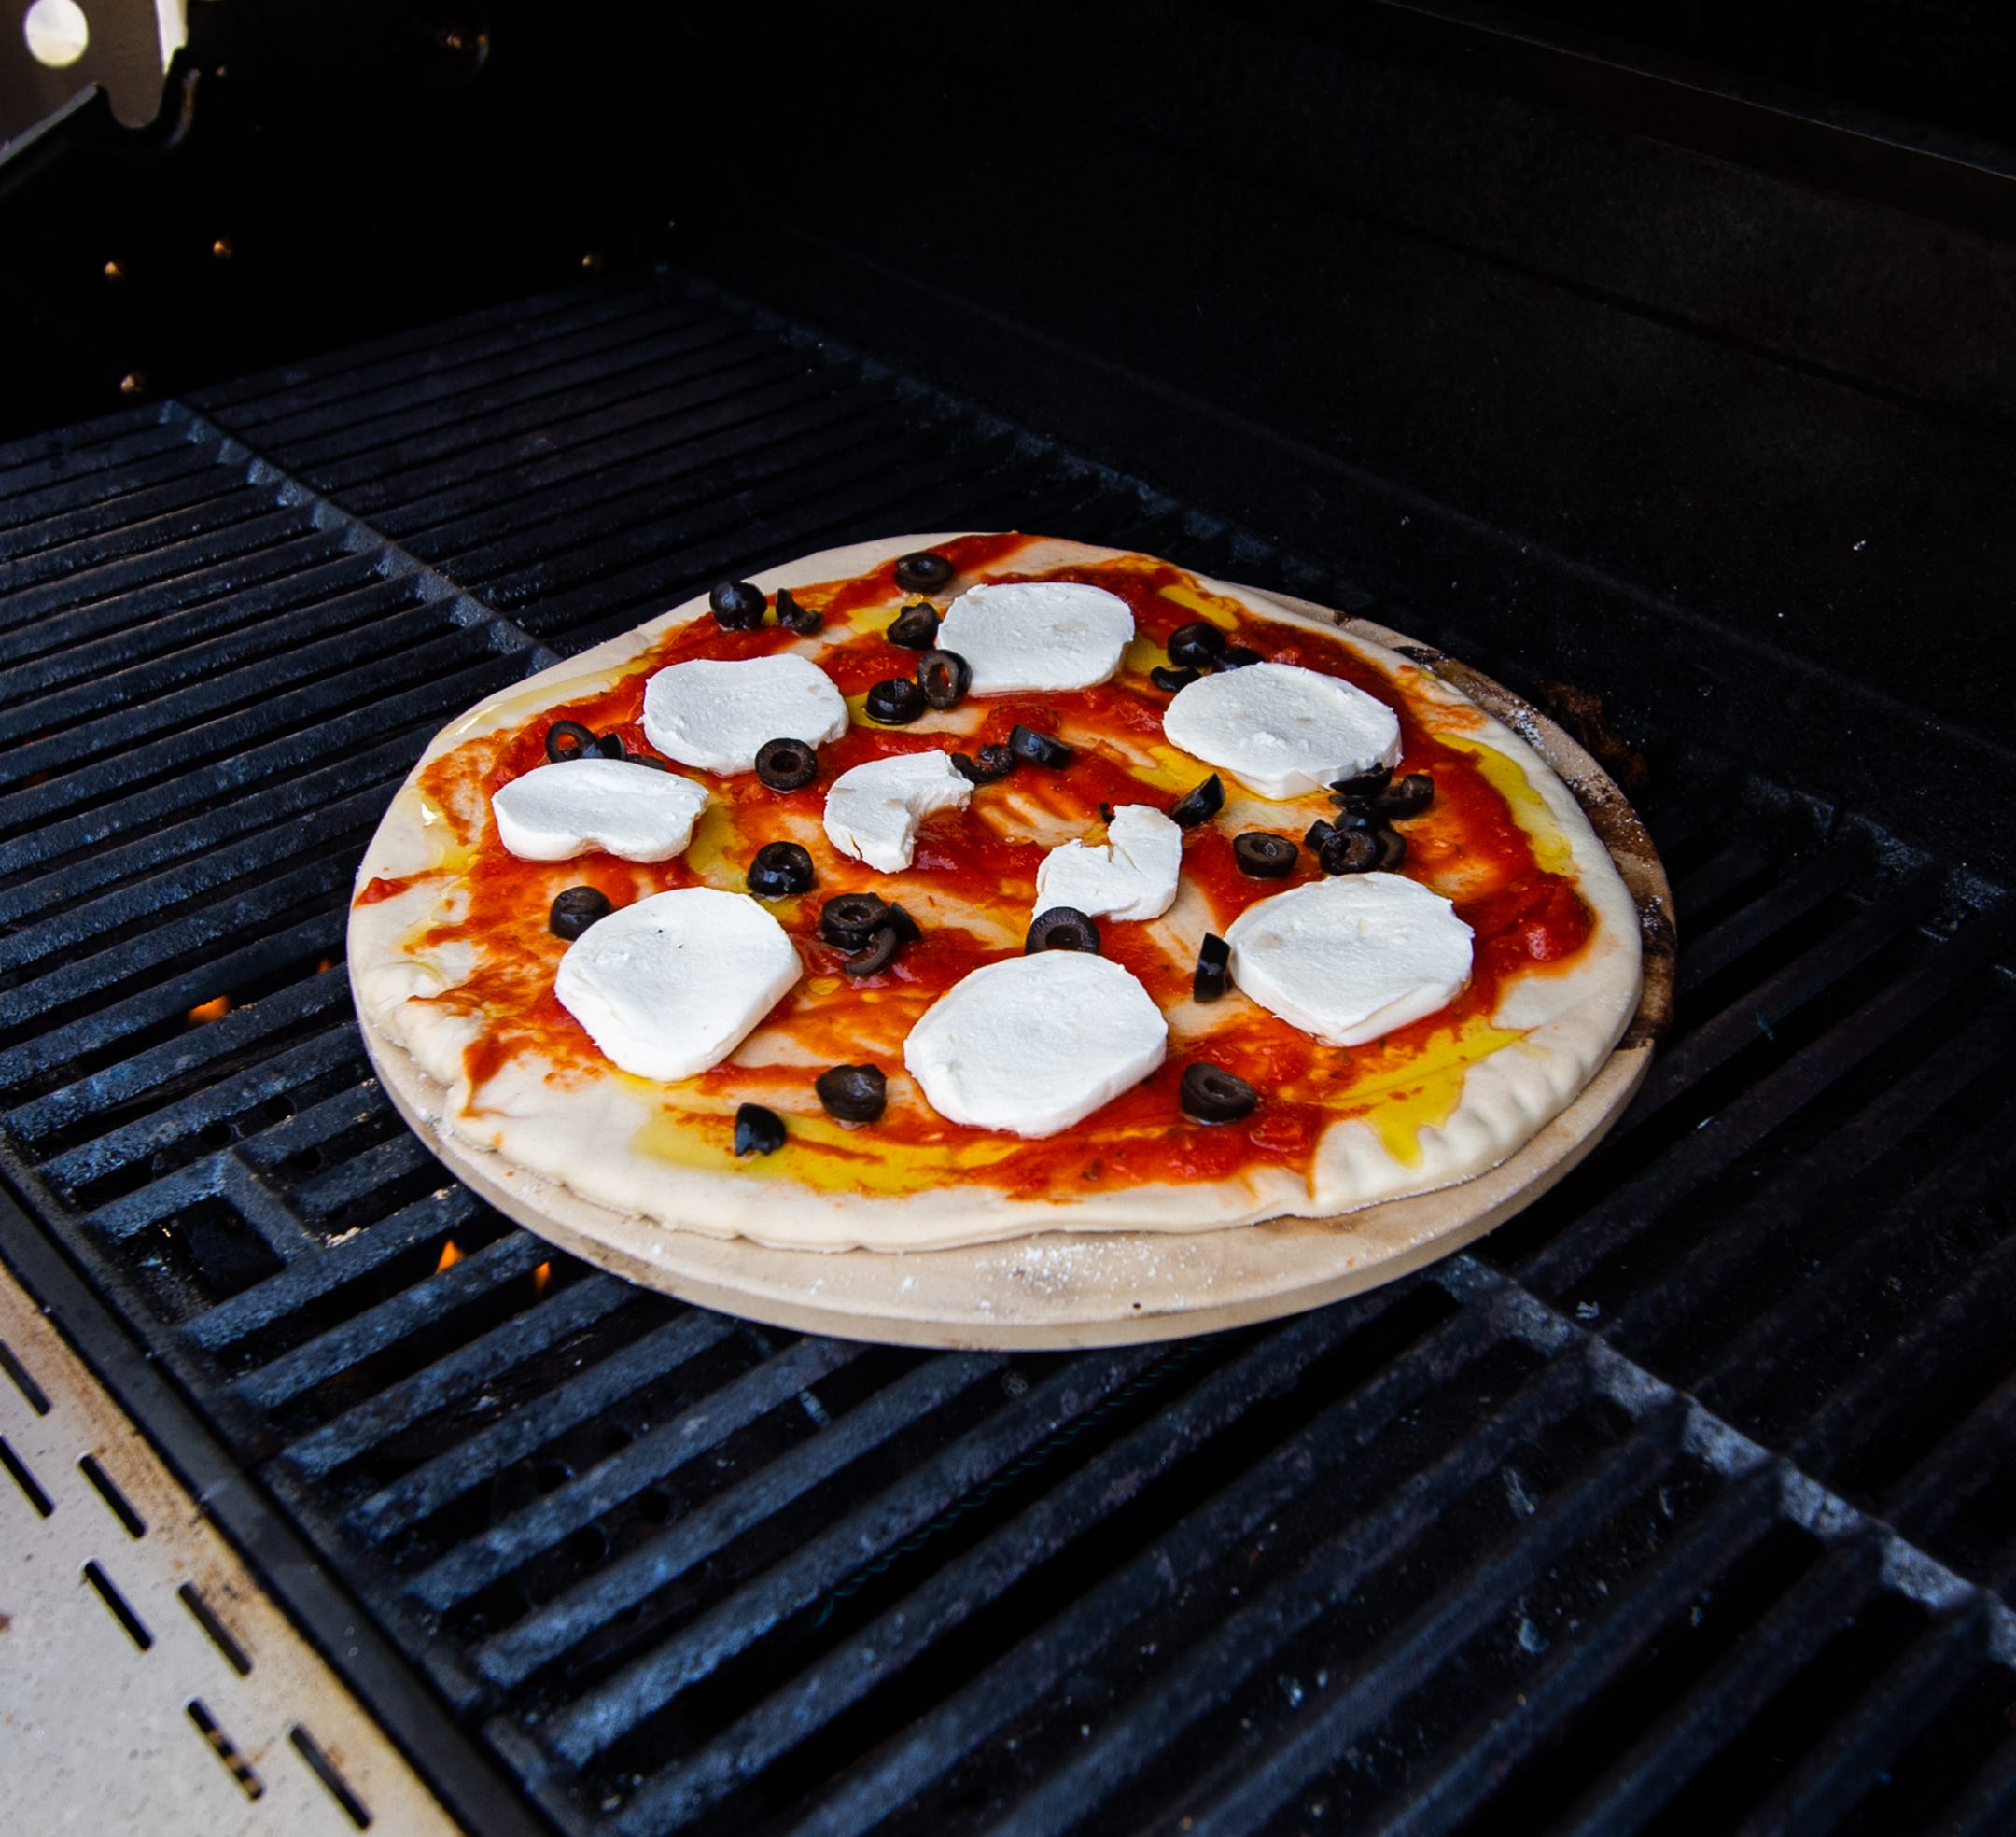 How to Grill Pizza, Grilled Pizza Recipe